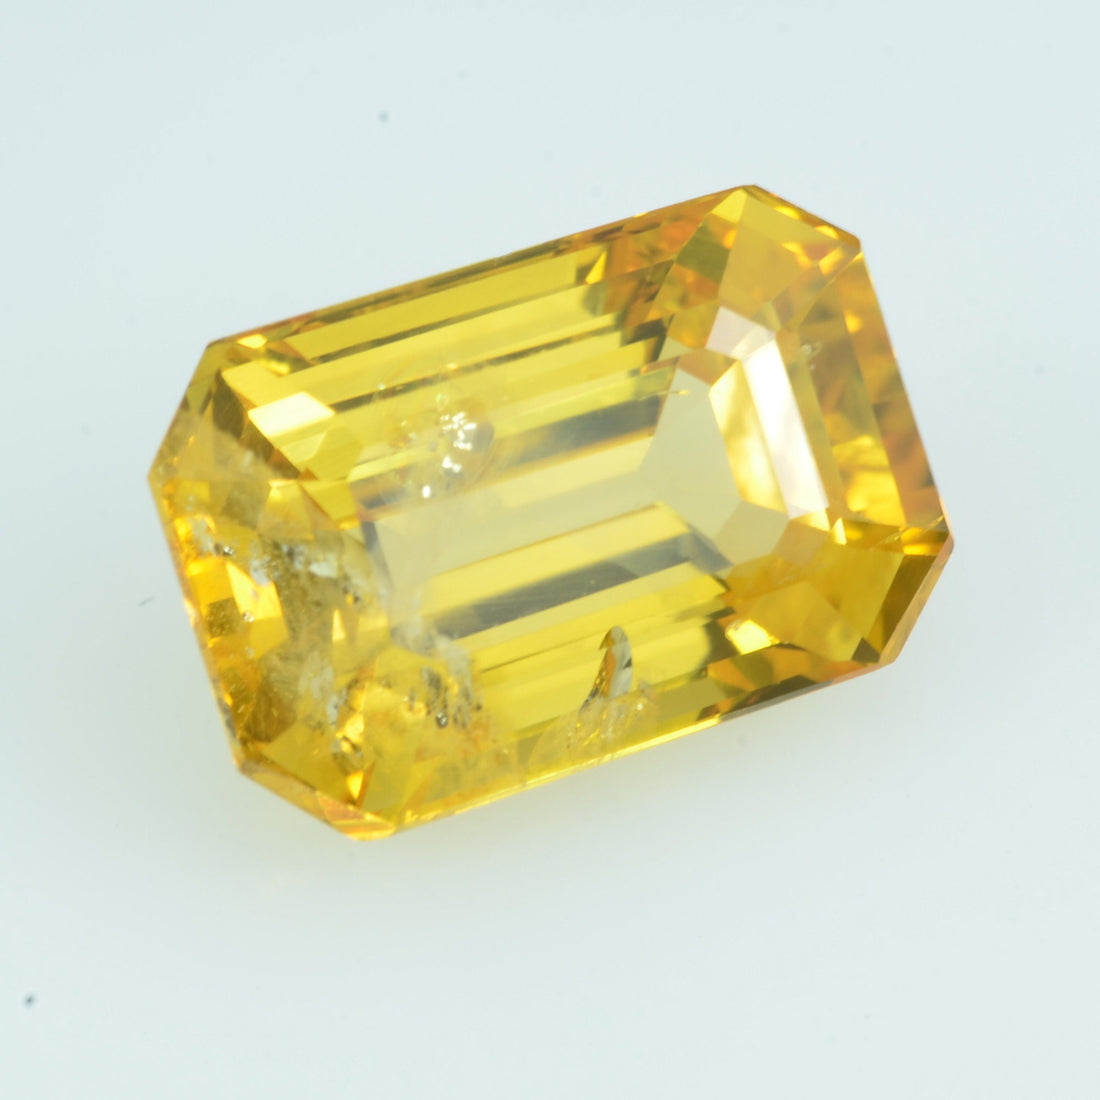 2.41 cts Natural Yellow Sapphire Loose Gemstone Octagon Cut